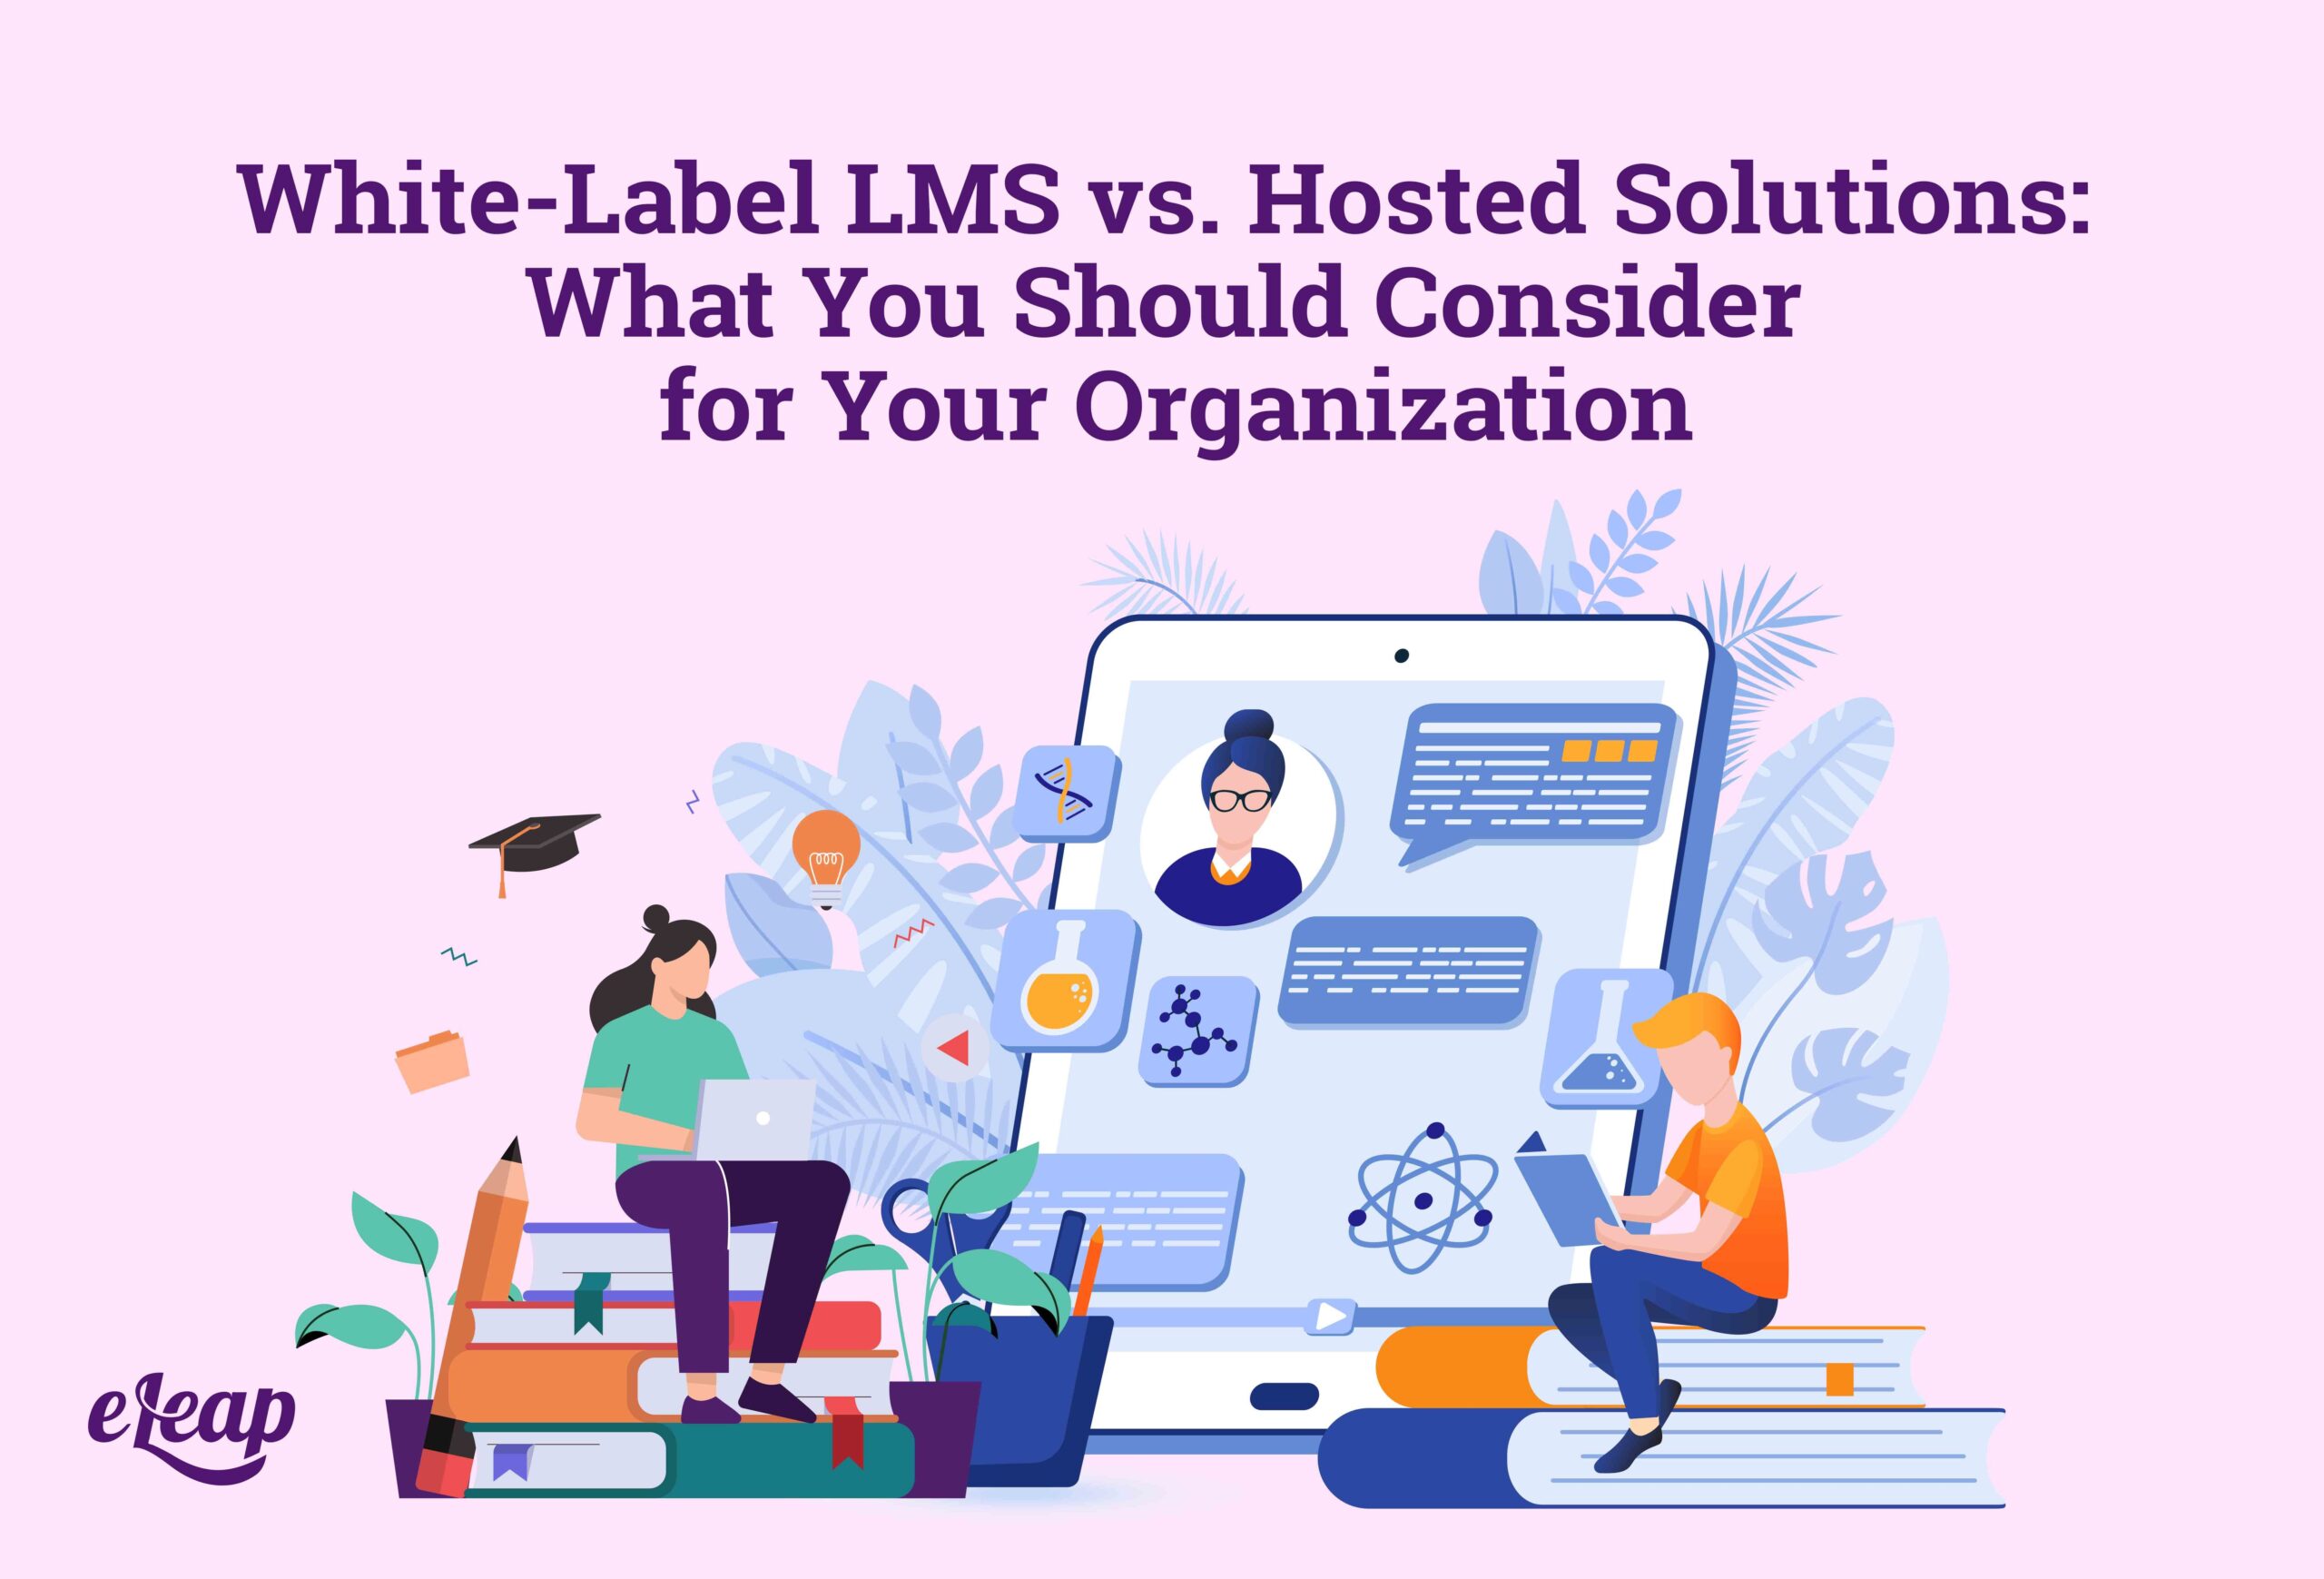 White-Label LMS vs. Hosted Solutions: What You Should Consider for Your Organization